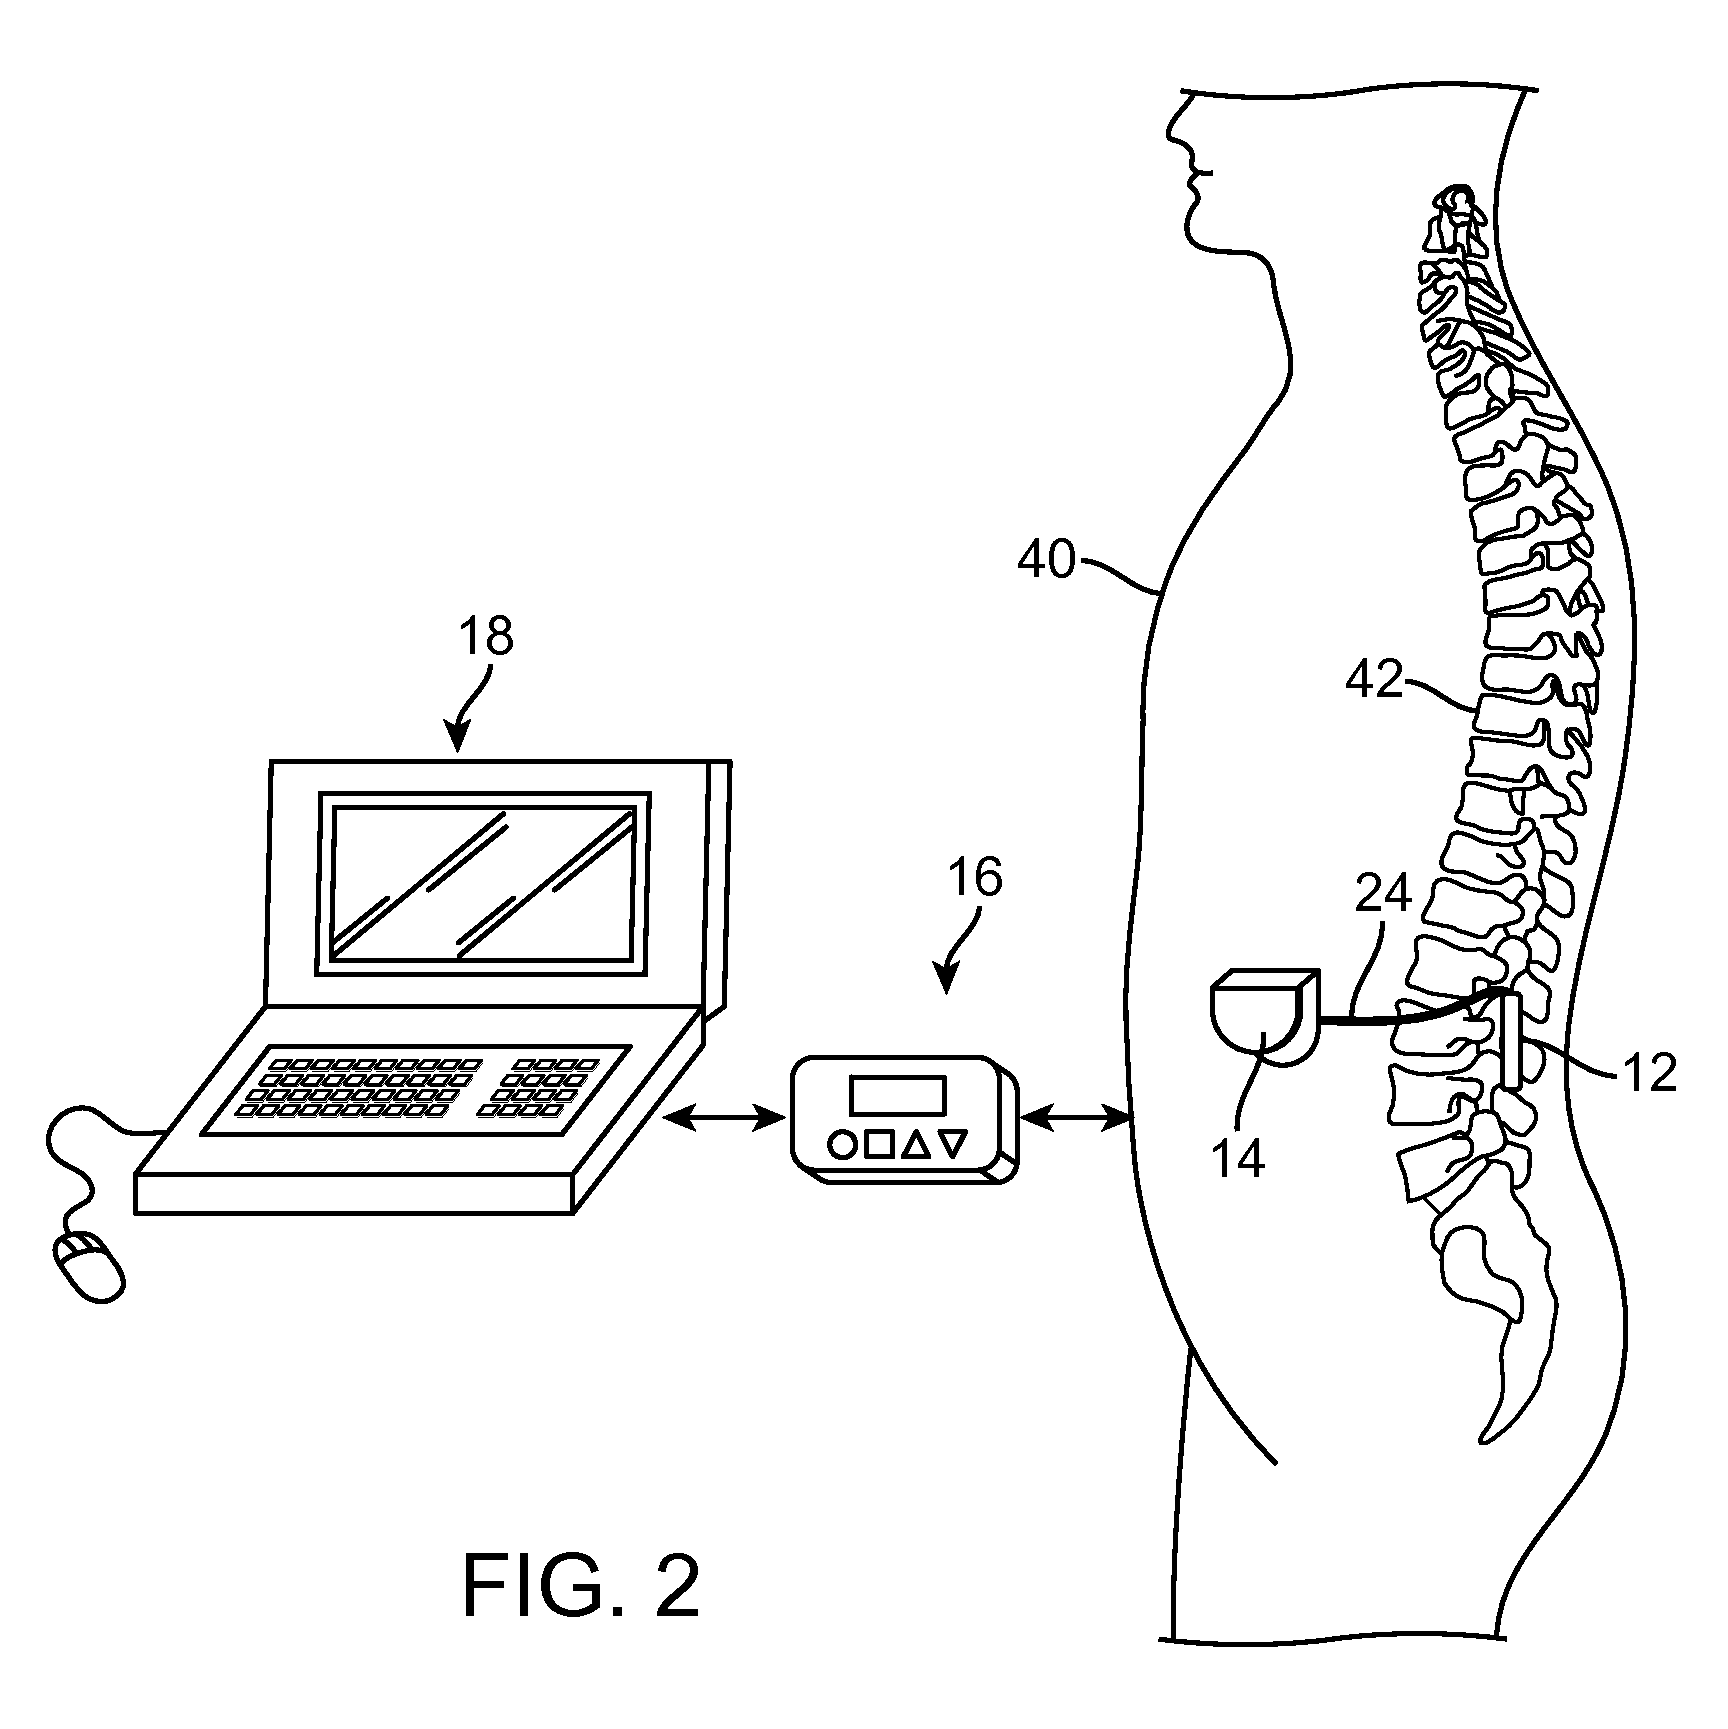 System and method for electrical modulation of the posterior Longitudinal ligament